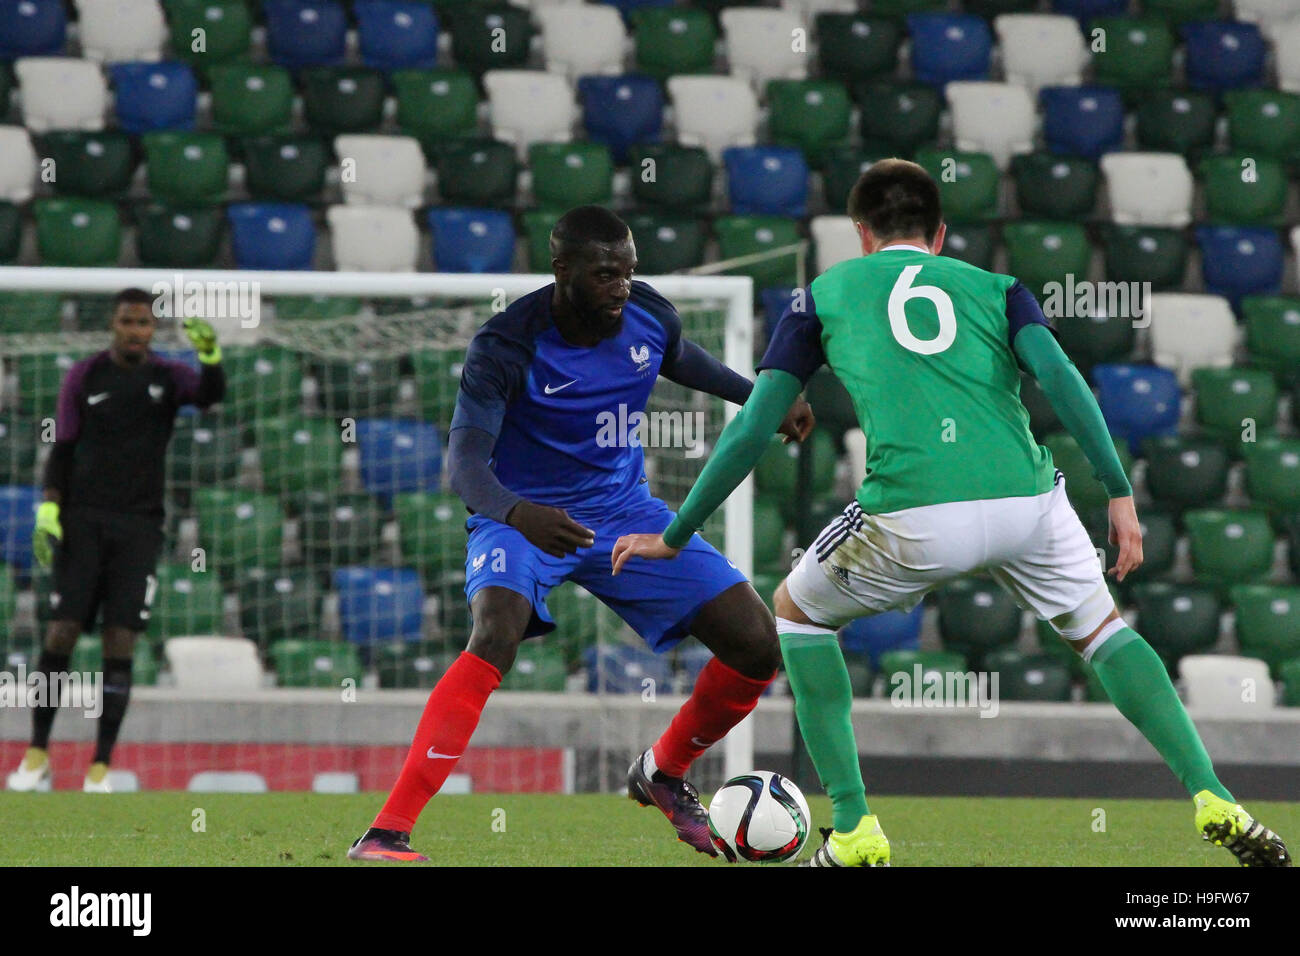 National Football Stadium at Windsor Park, Belfast. 11th October 2016. Northern Ireland 0 France 3 (UEFA European U21 Championship - Qualifying game Group C). Tiemoué Bakayoko (7-blue) in action for France. Stock Photo